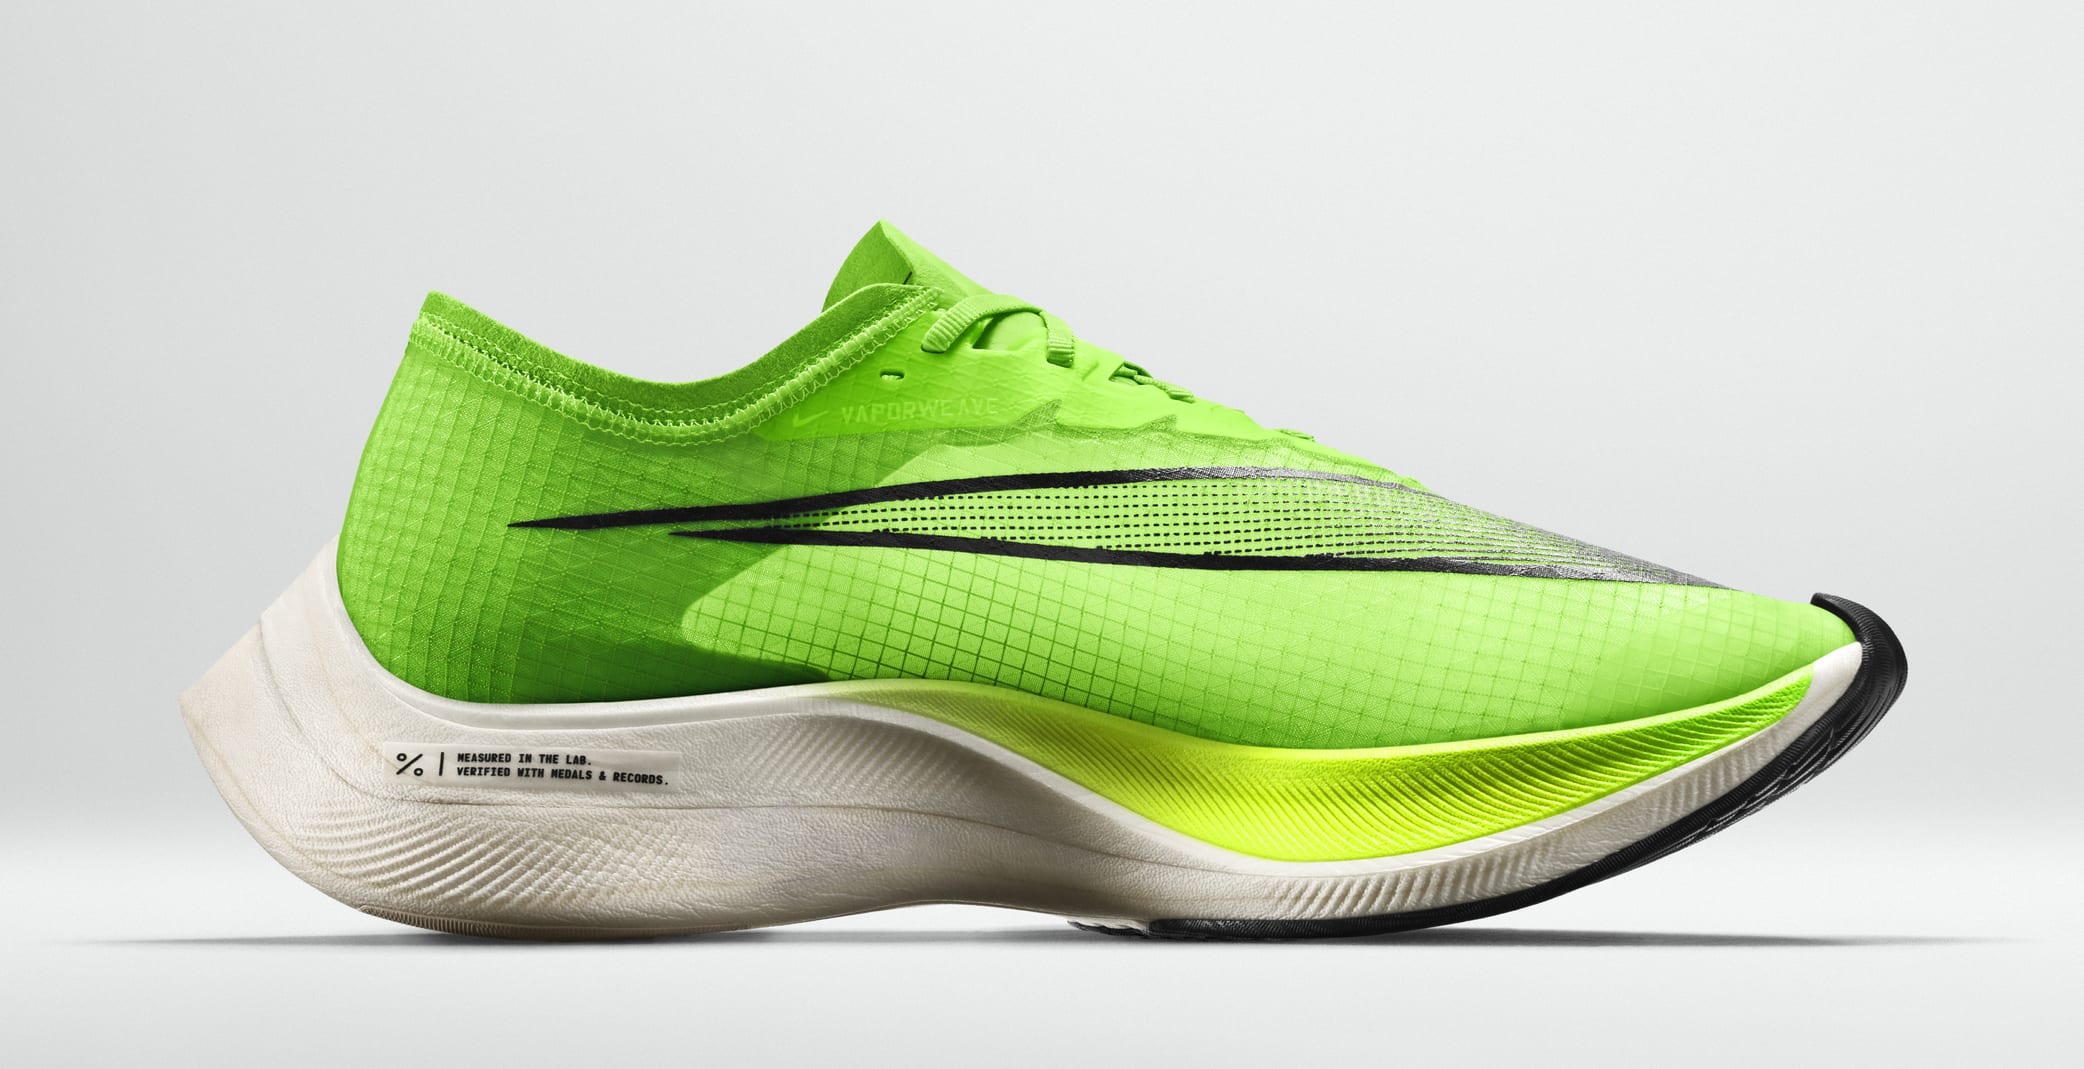 Nike ZoomX Vaporfly Next% Unveiled: Detailed s